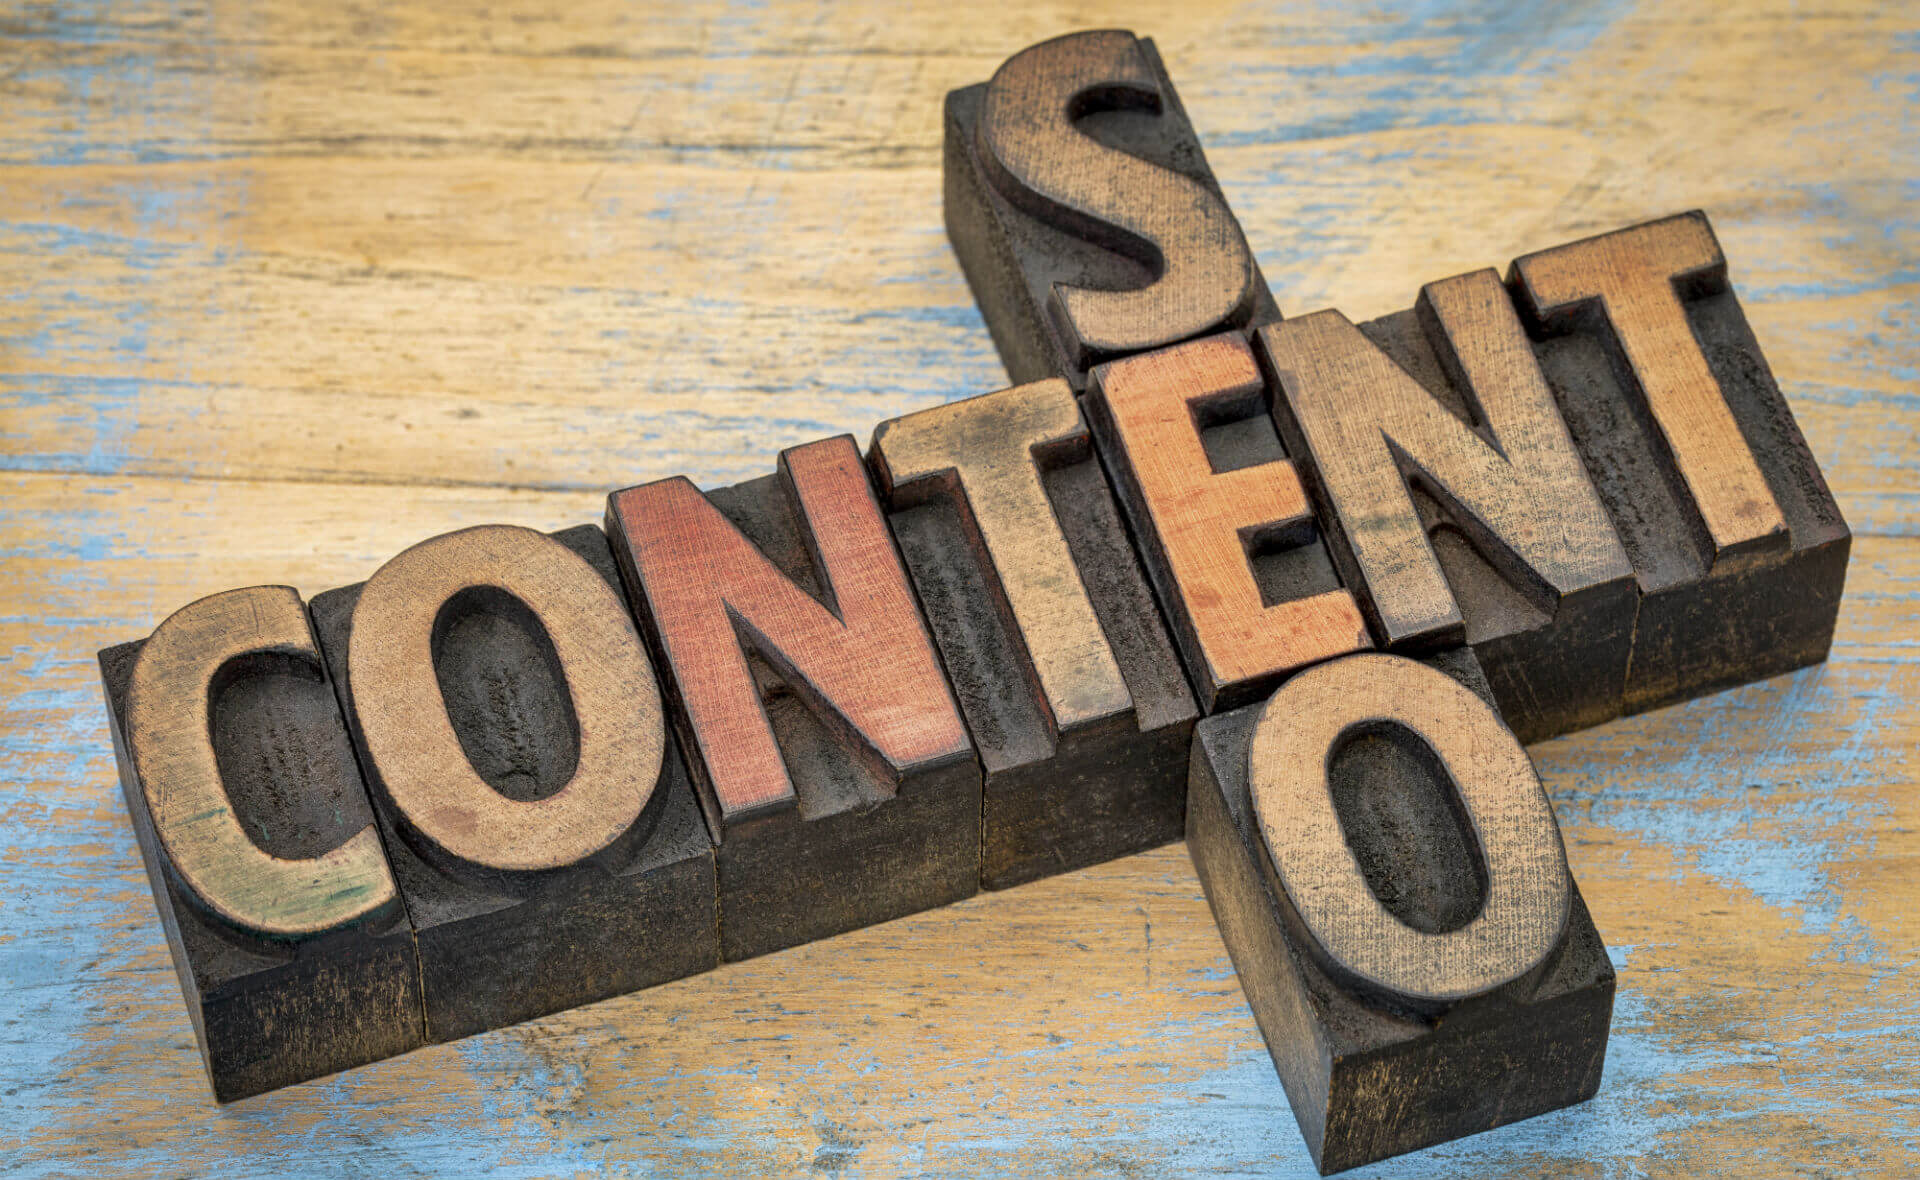 How to write content optimized for SEO